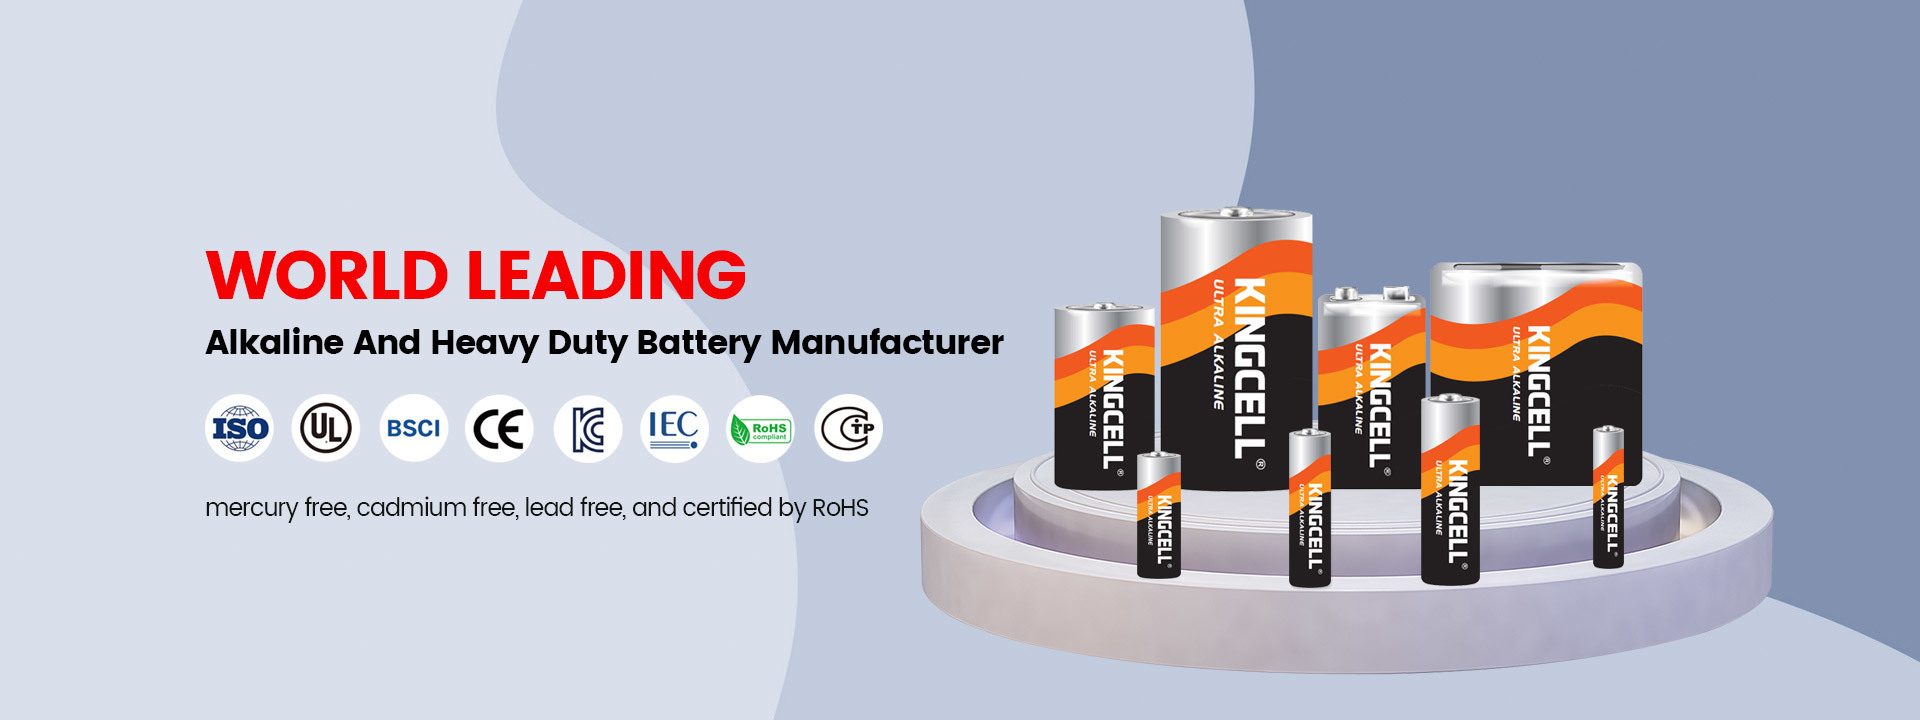 World Leading Alkaline And Heavy Duty Battery Manufacturer